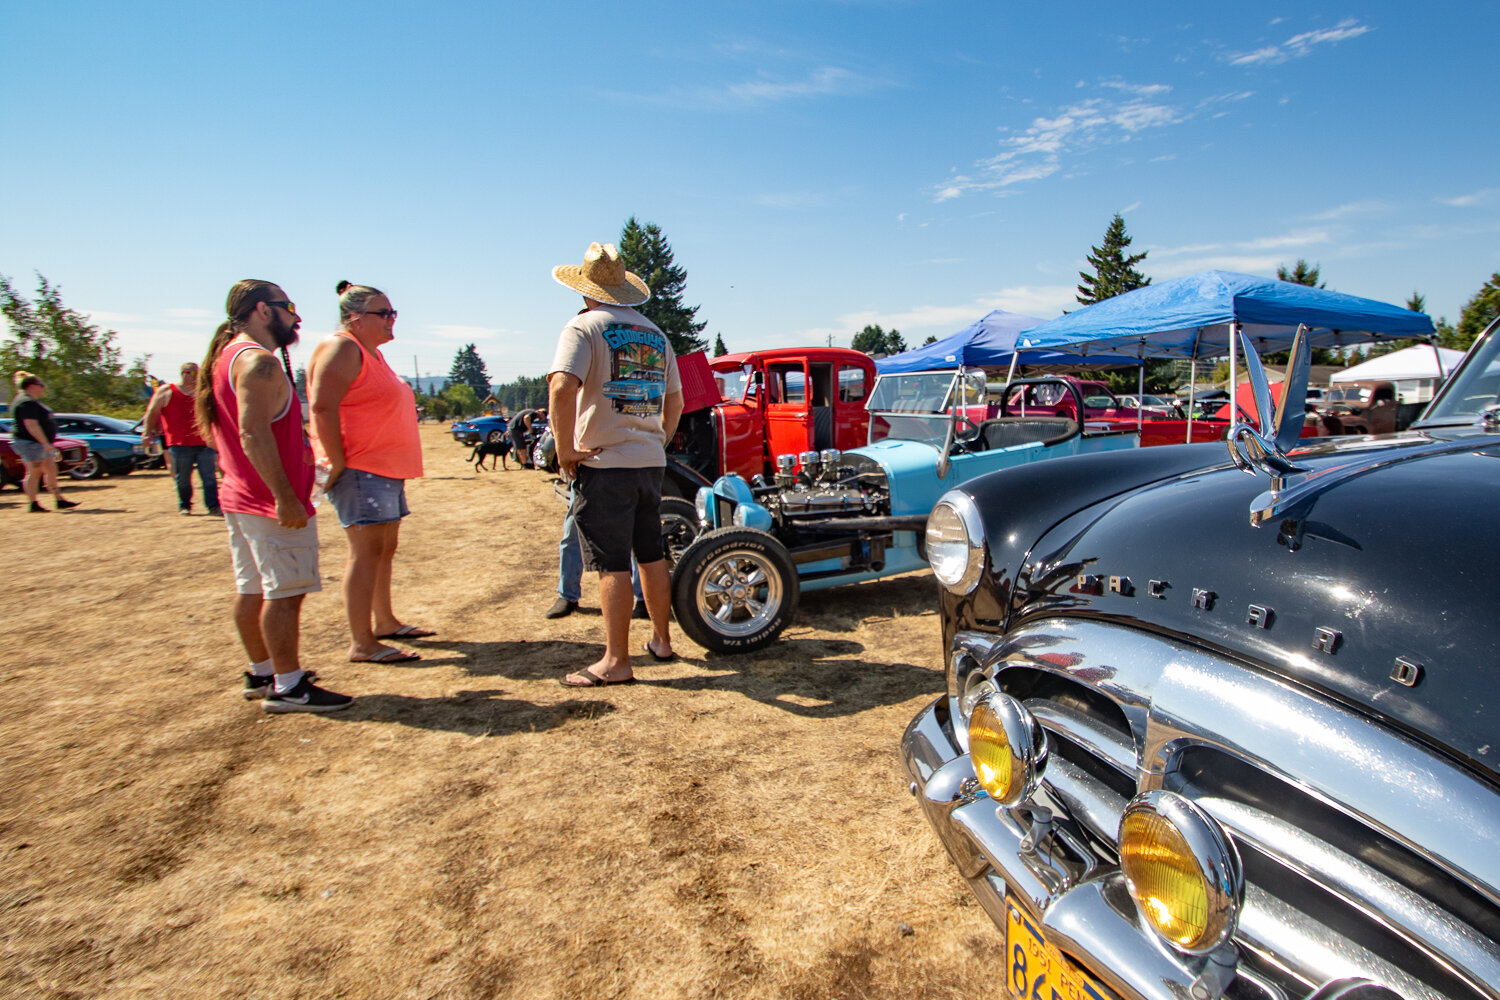 Car show attendees mingle at the 16th annual Military Heroes Car Show at Wilkowski Park in Rainier on Saturday, Sept. 2.